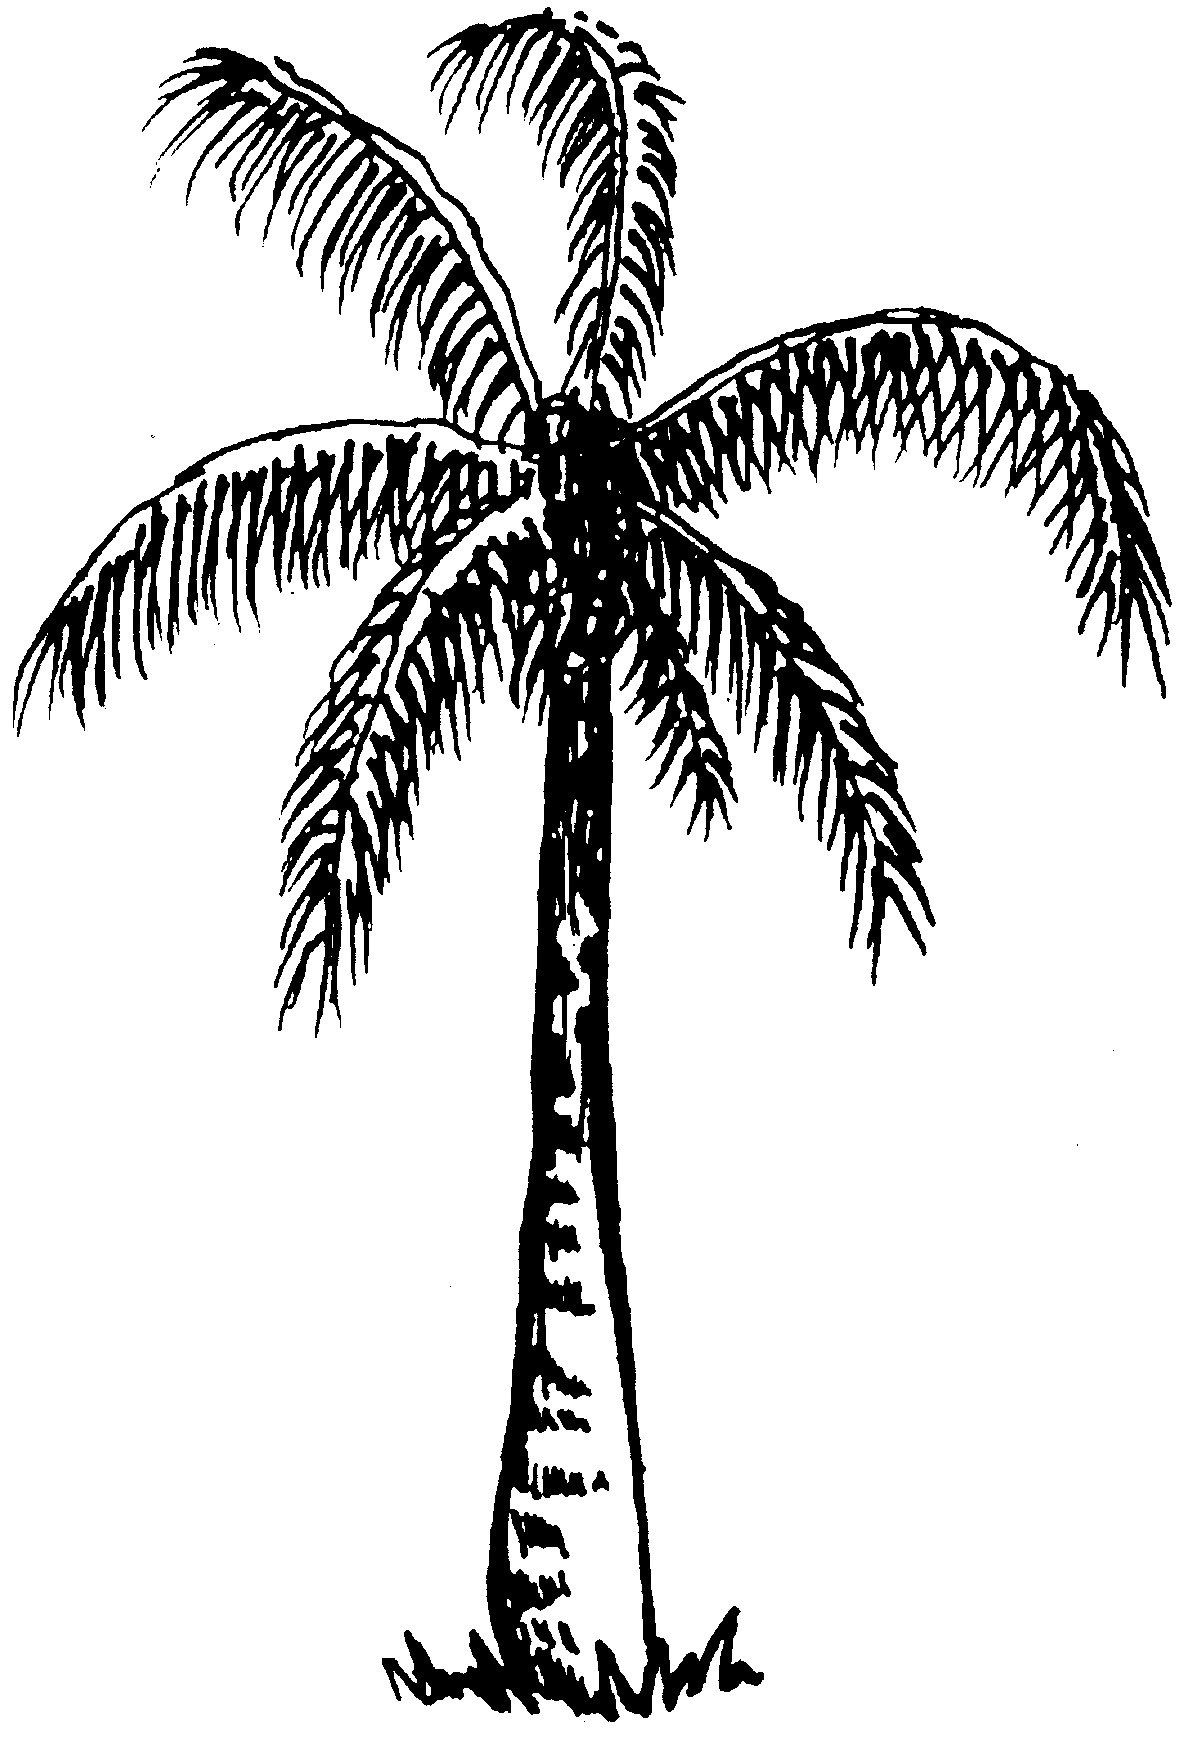 Clipart Tree Black And White | Clipart Panda - Free Clipart Images